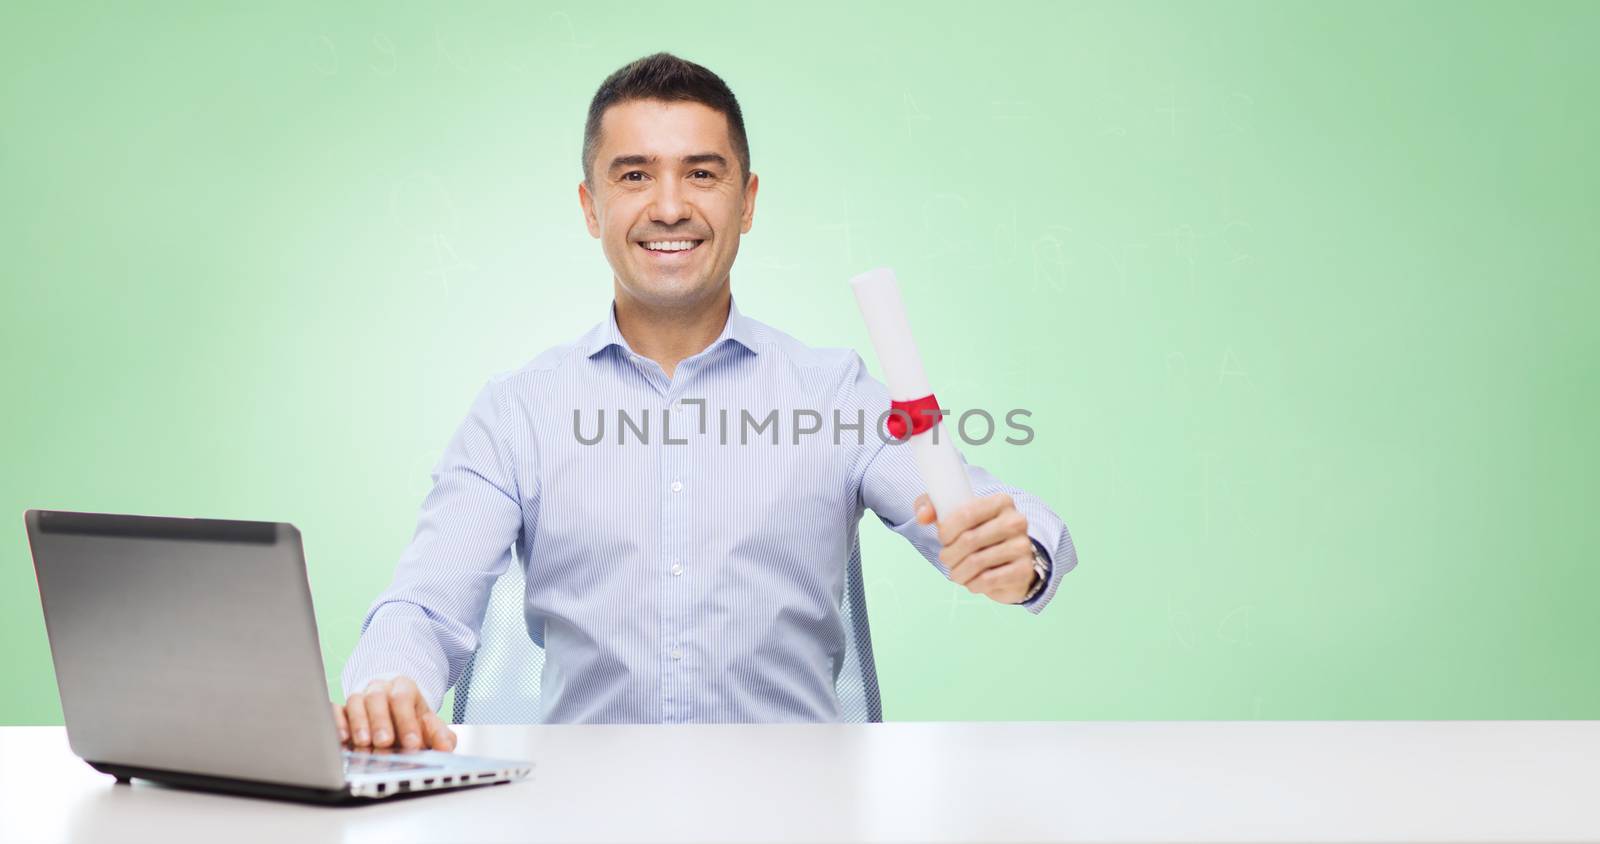 smiling man with diploma and laptop at table by dolgachov